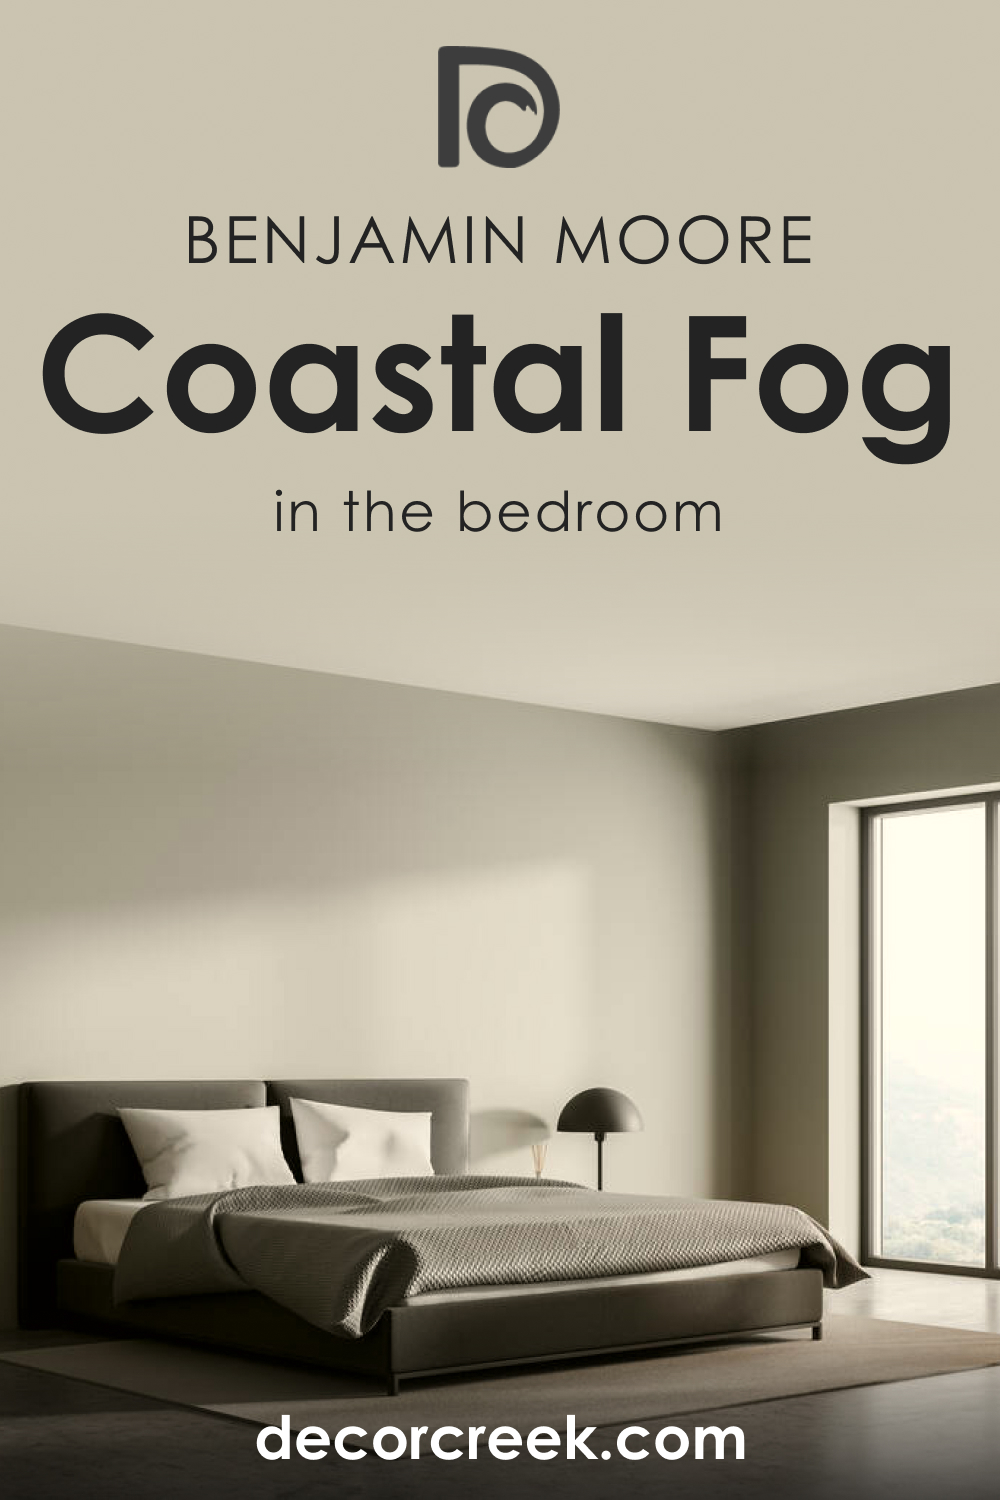 How to Use Coastal Fog AC-1 in the Bedroom?